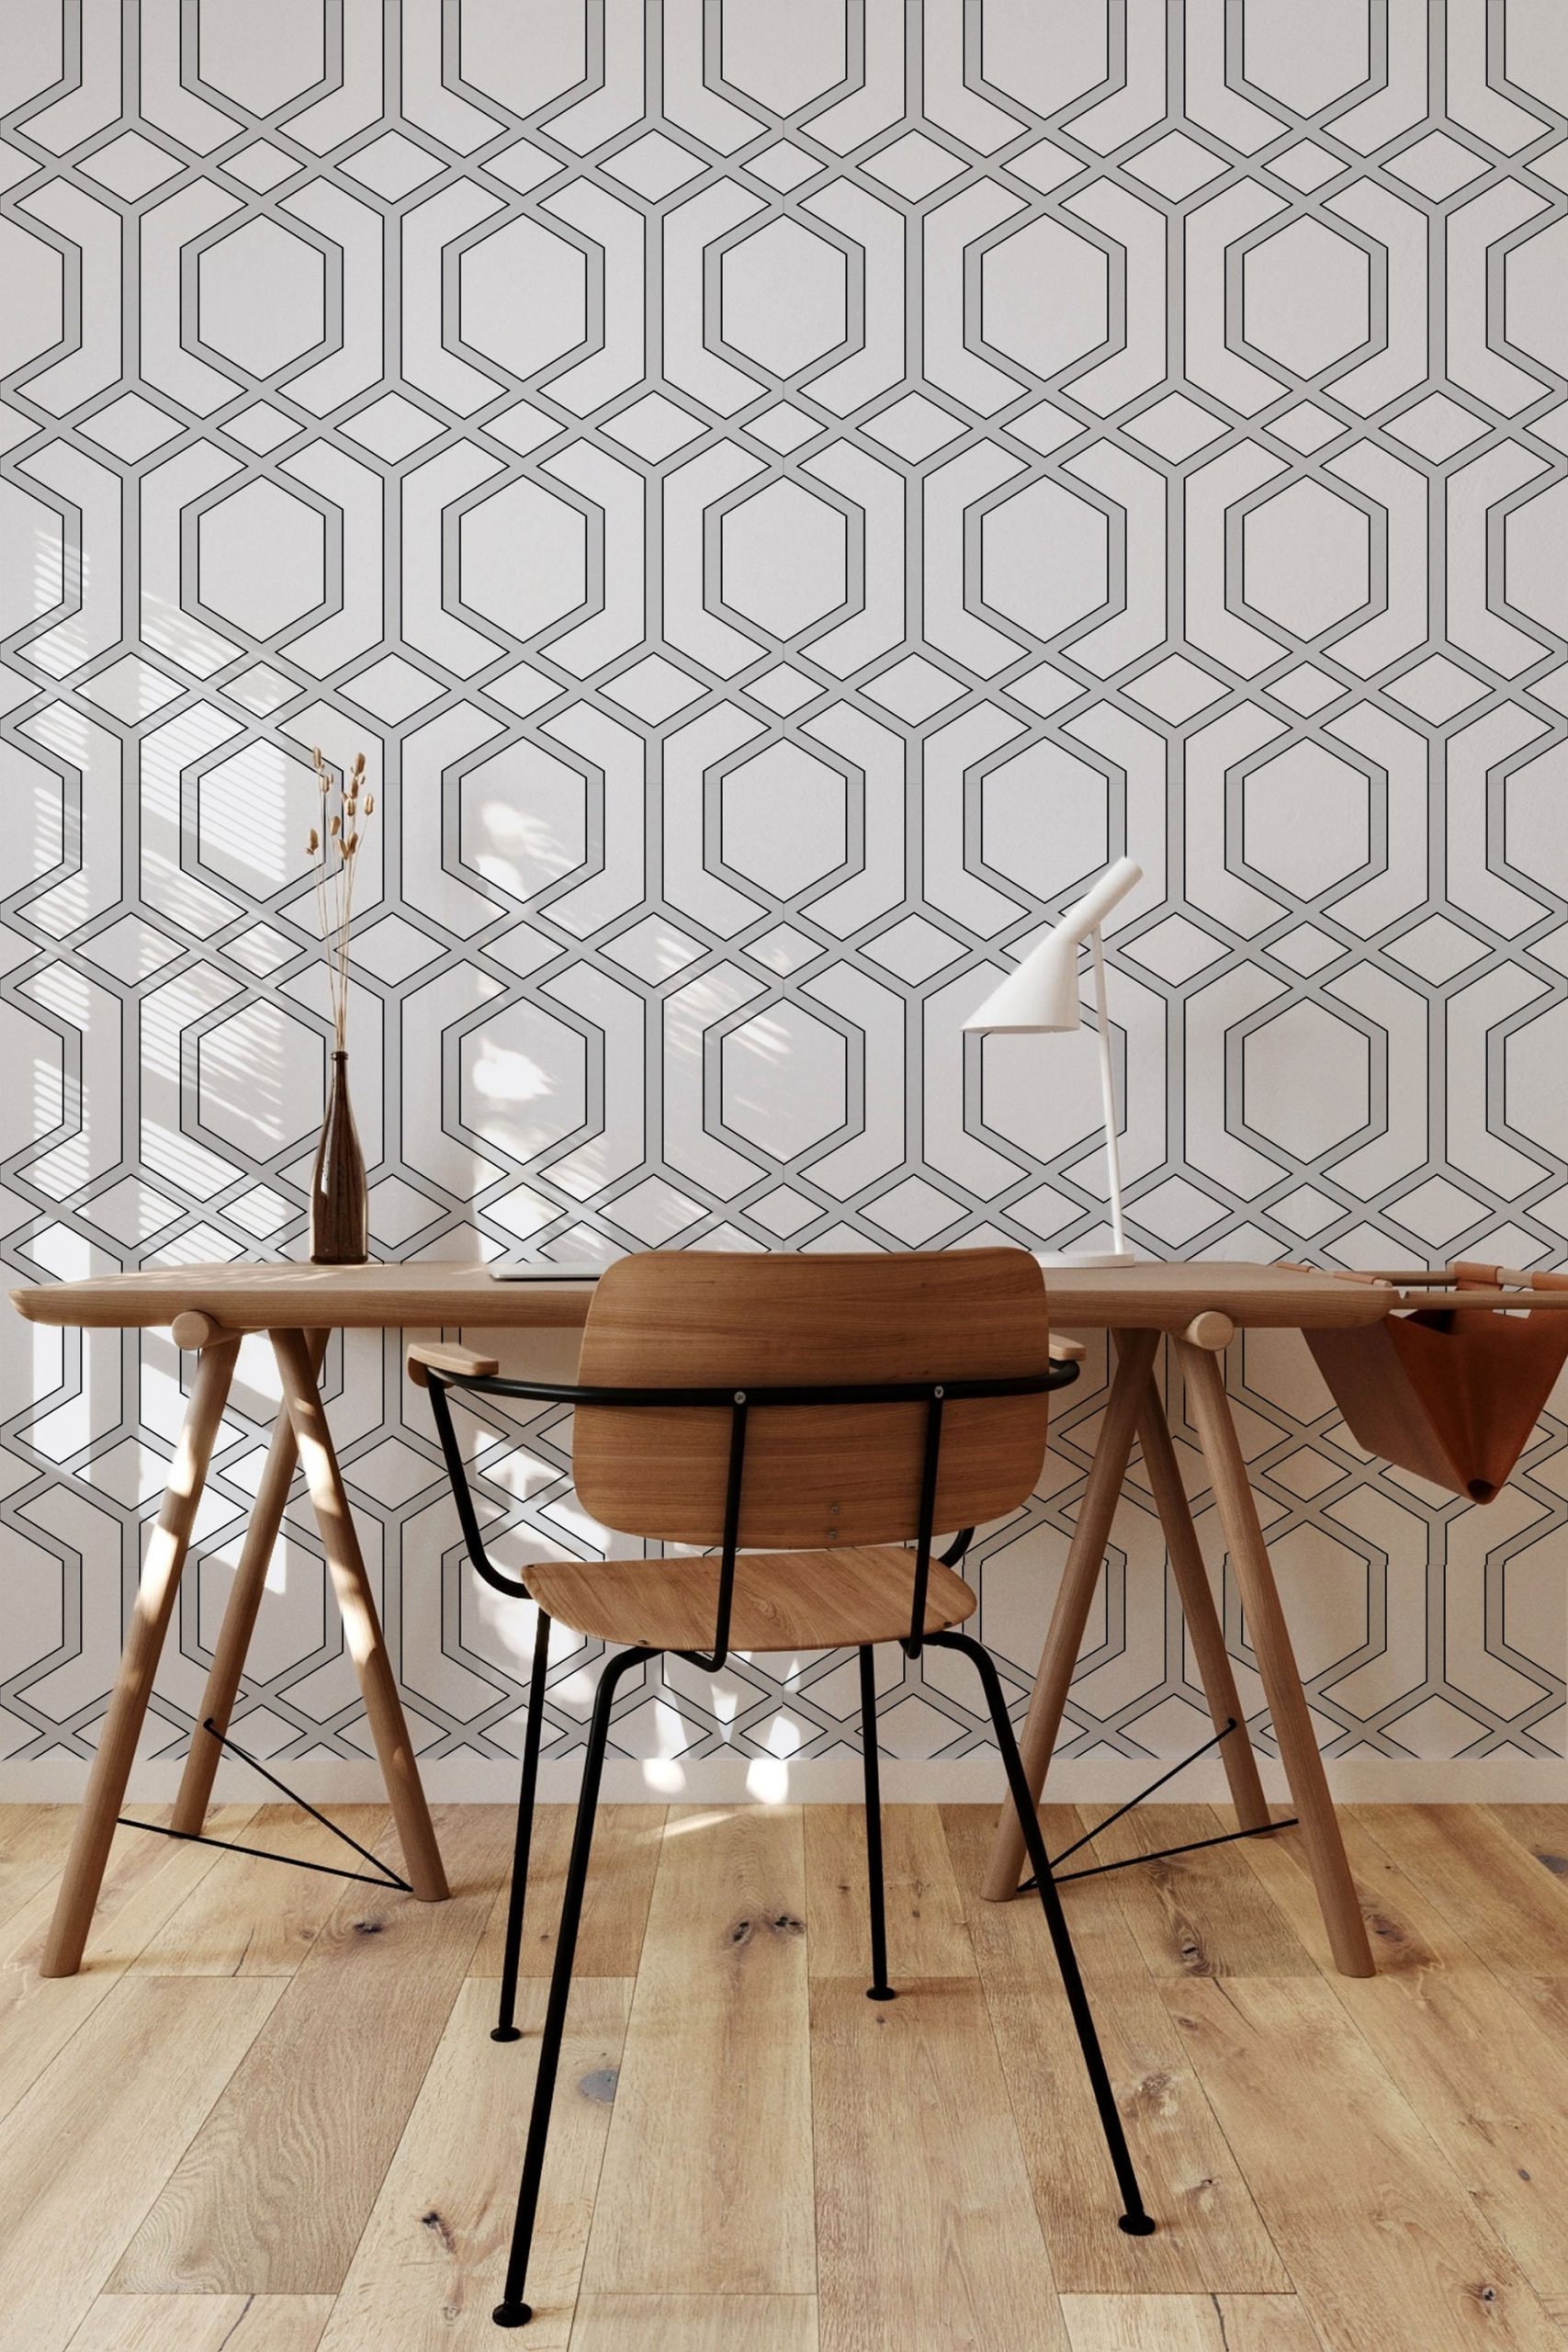 Gray Trellis Wallpaper Wall Covering Self Adhesive Peel And Stick